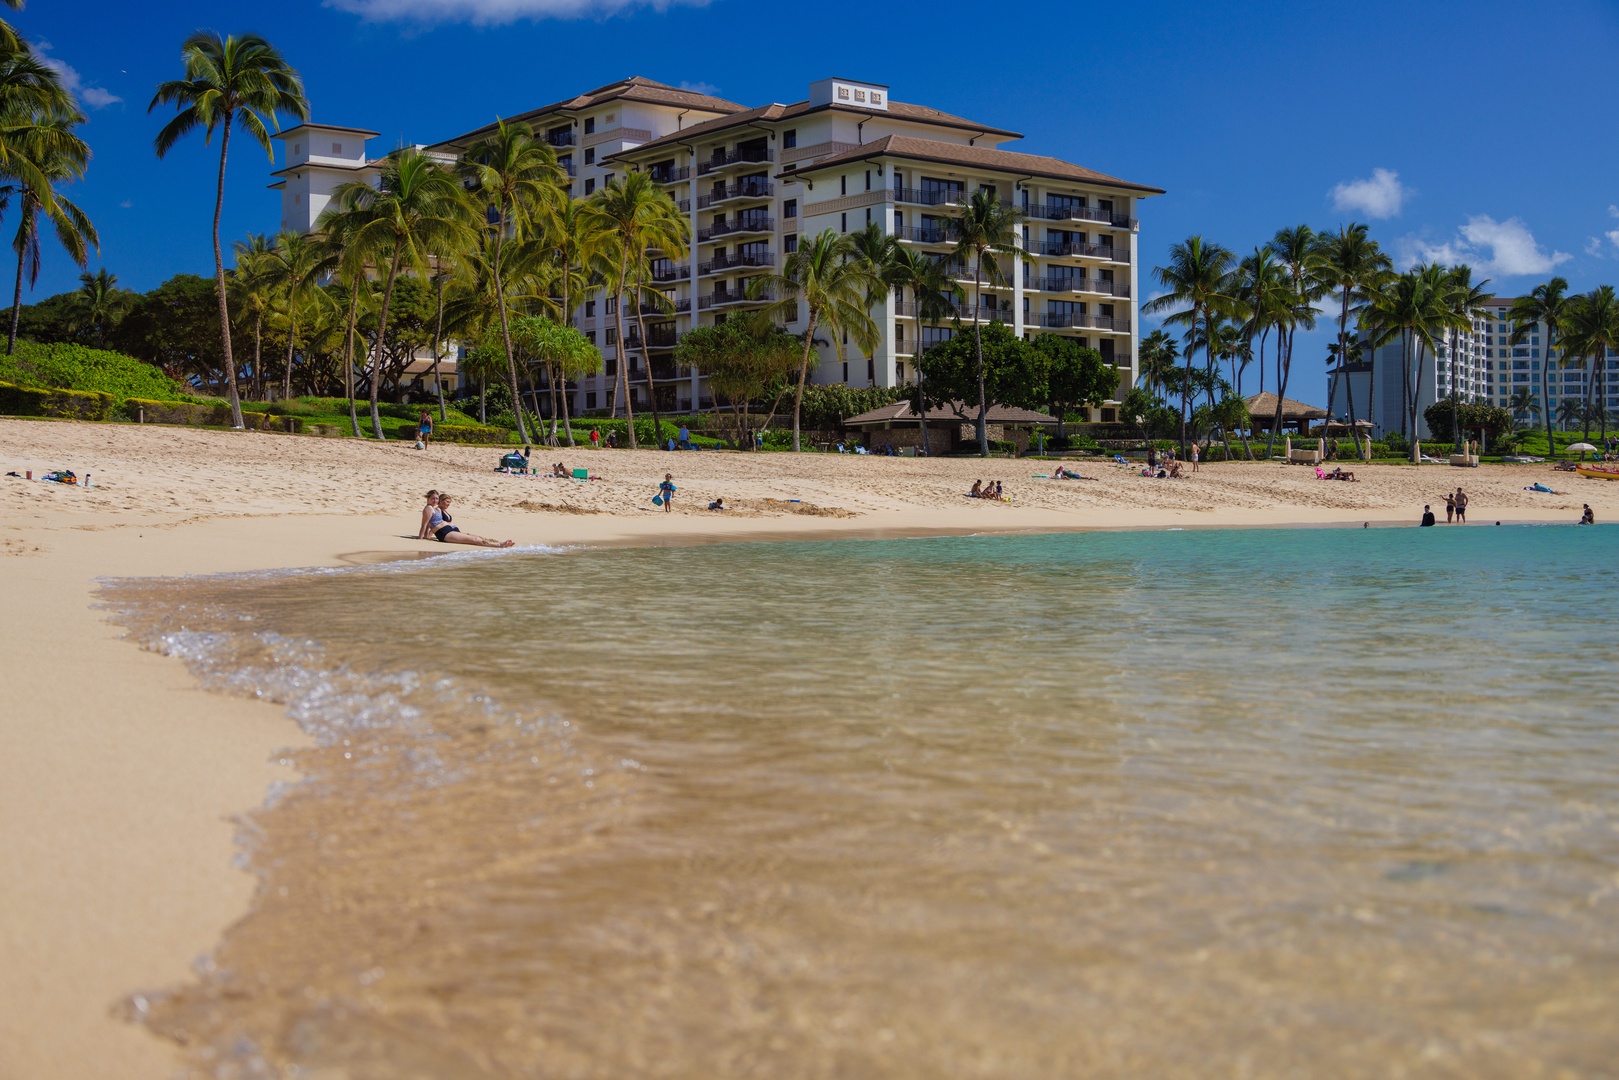 Kapolei Vacation Rentals, Ko Olina Kai 1057B - The private lagoon at Ko Olina is the perfect place for a relaxing afternoon in the sun.